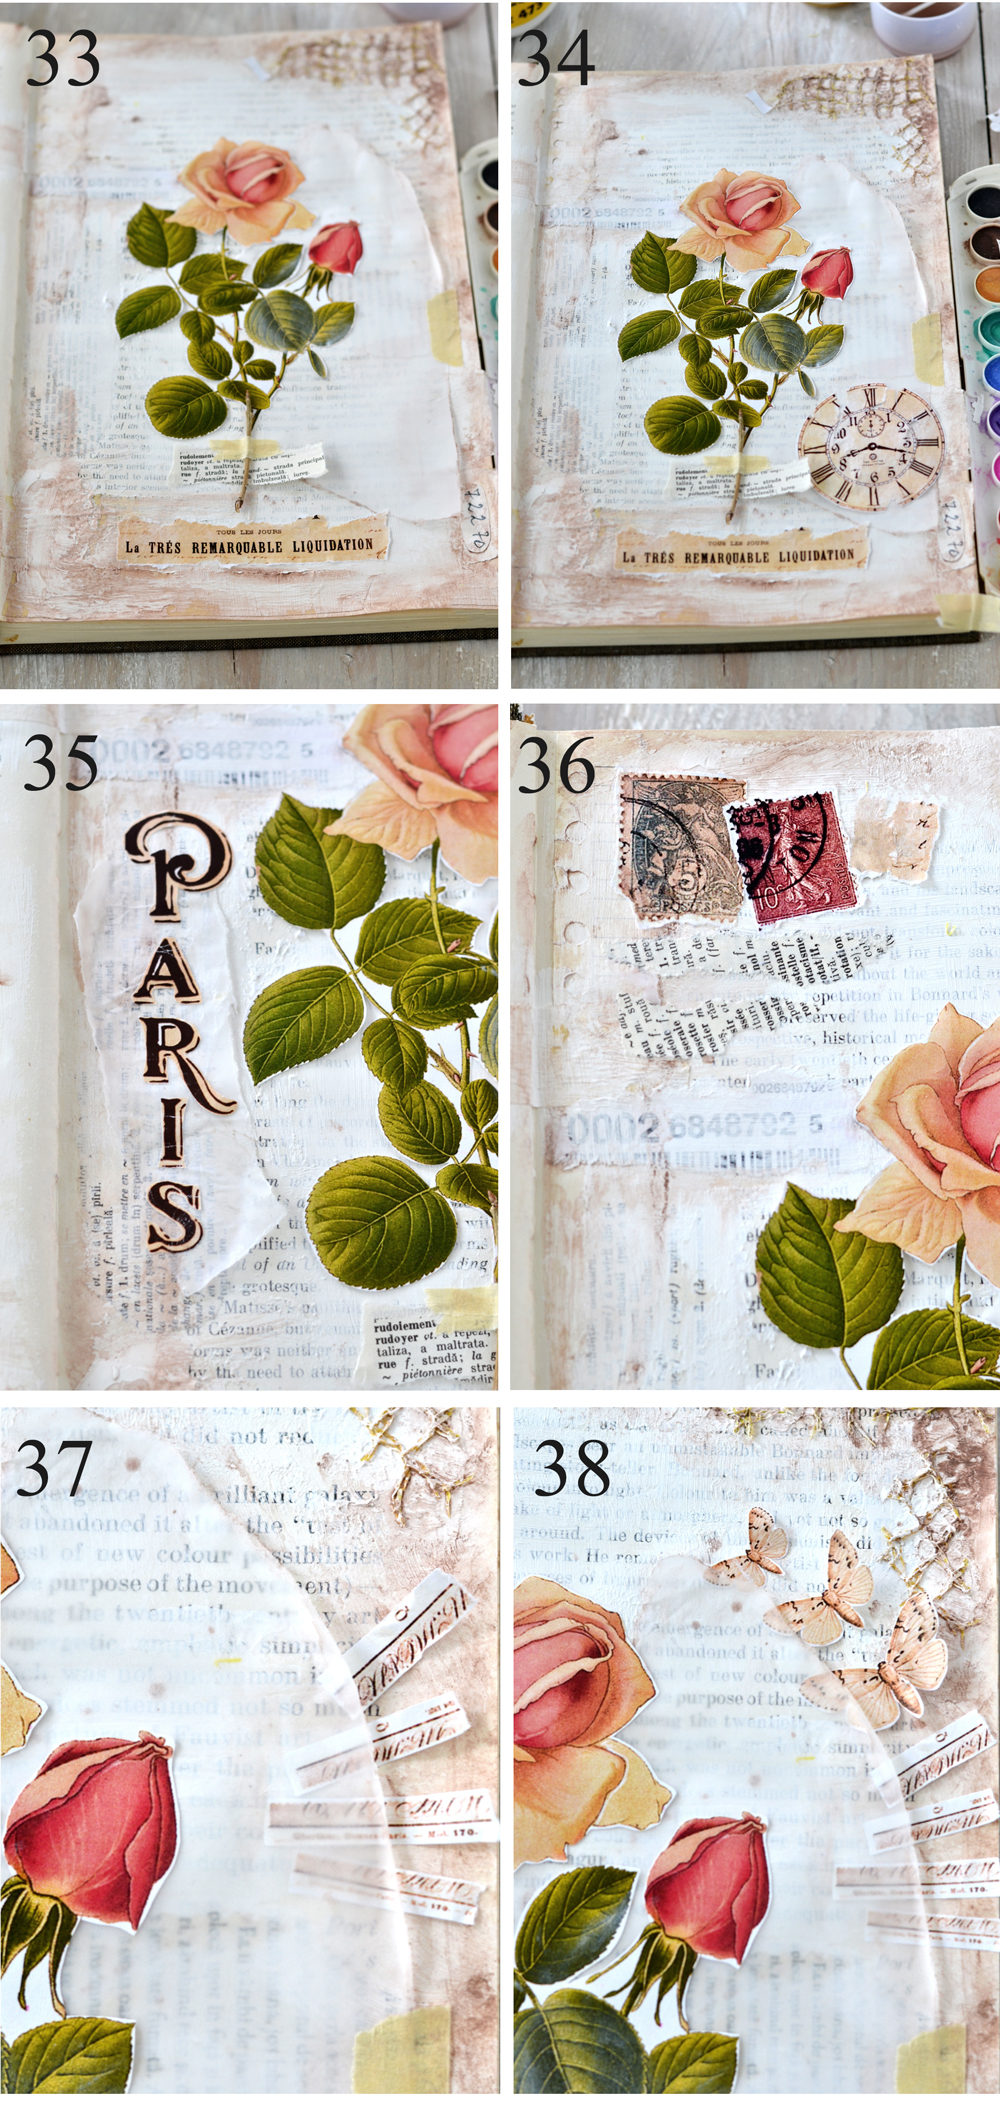 Altered Book Ideas collage